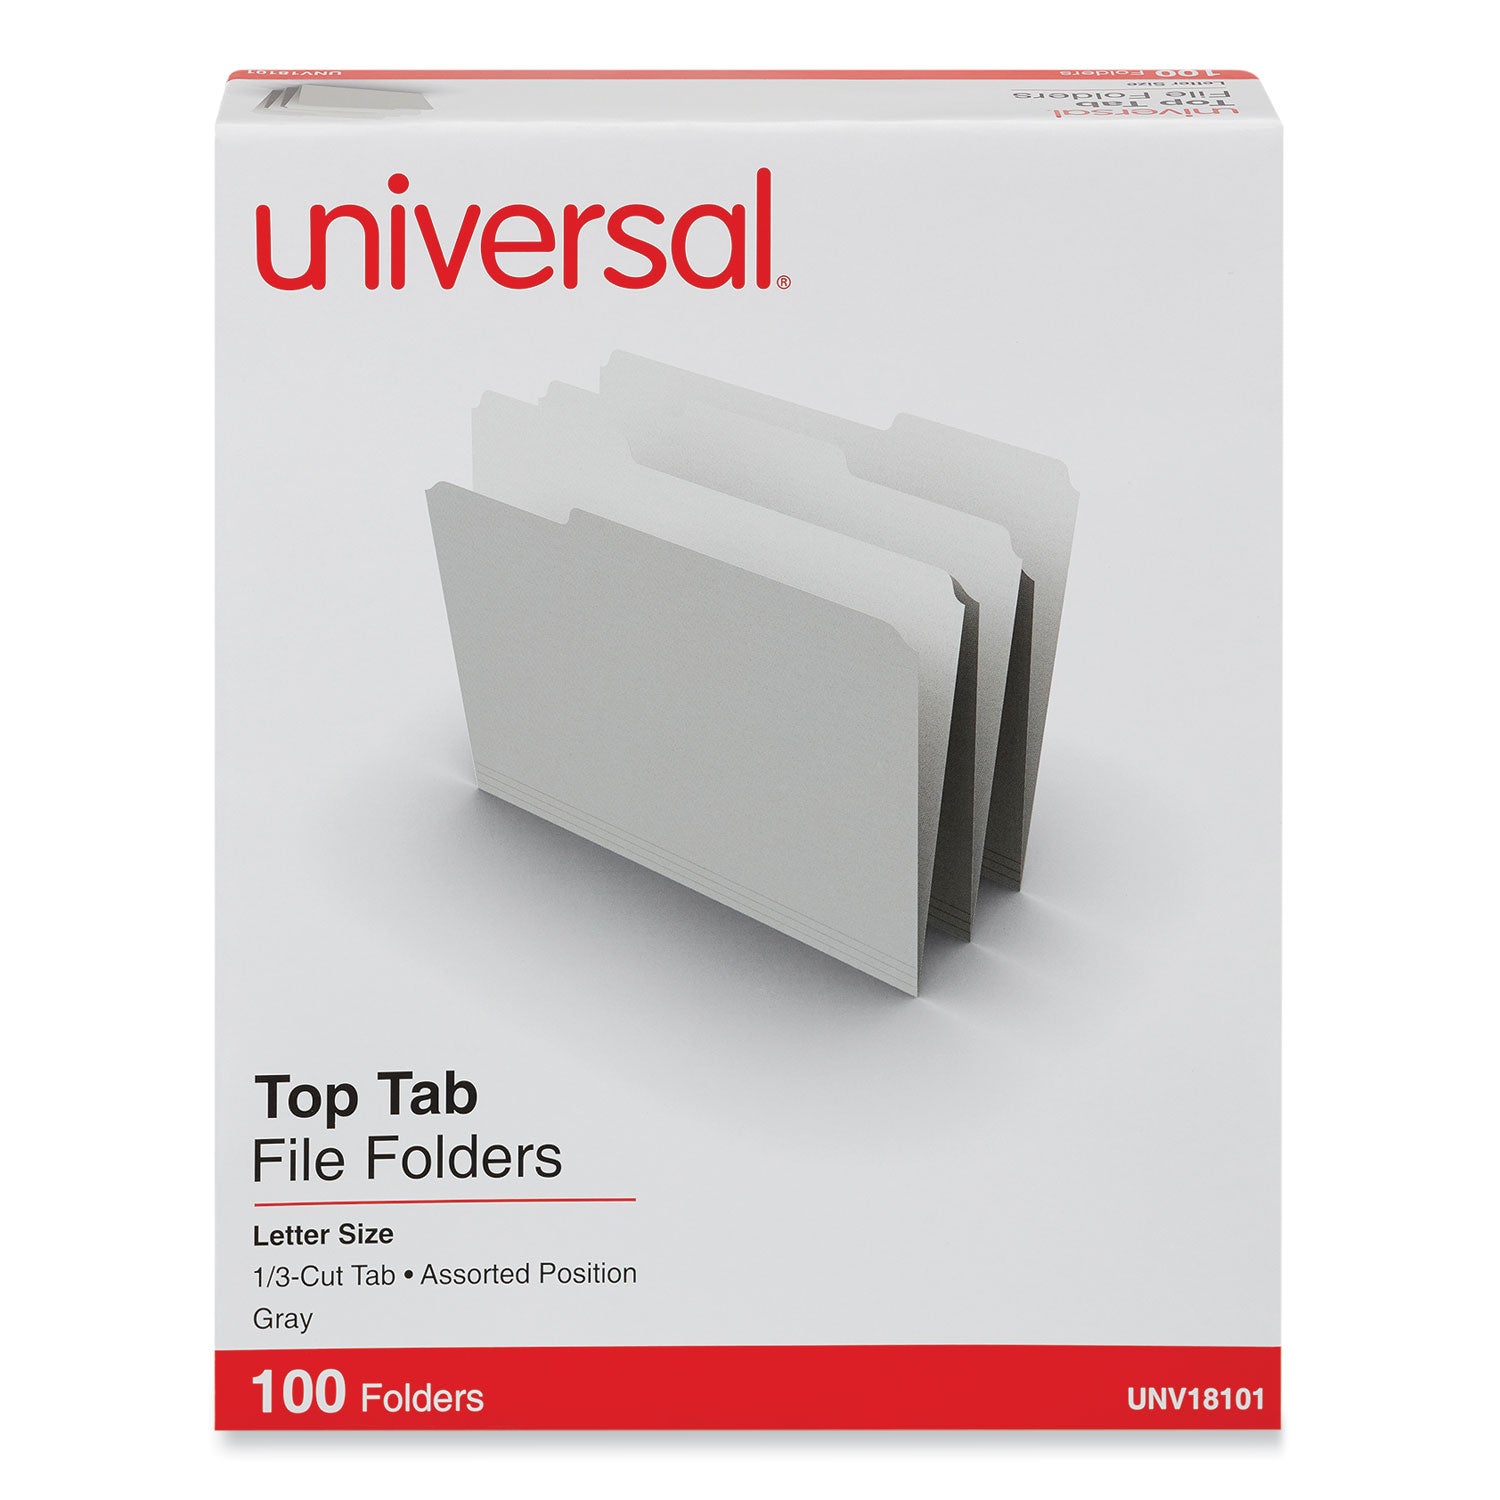 top-tab-file-folders-1-3-cut-tabs-assorted-letter-size-075-expansion-gray-100-box_unv18101 - 2